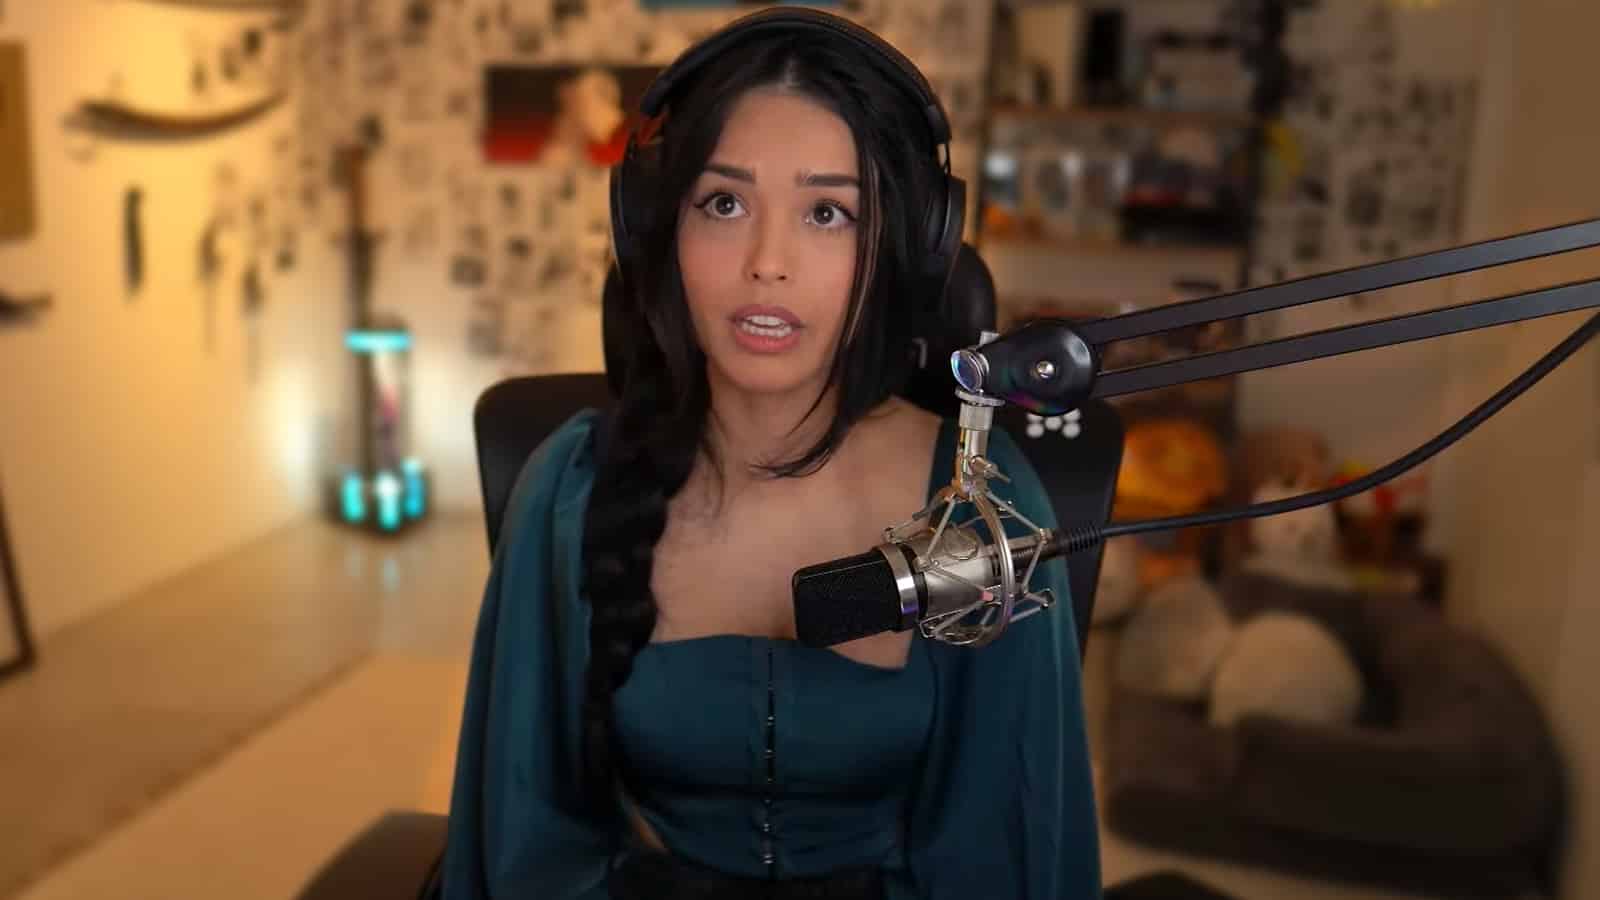 Valkyrae stares off in worry during YouTube stream.